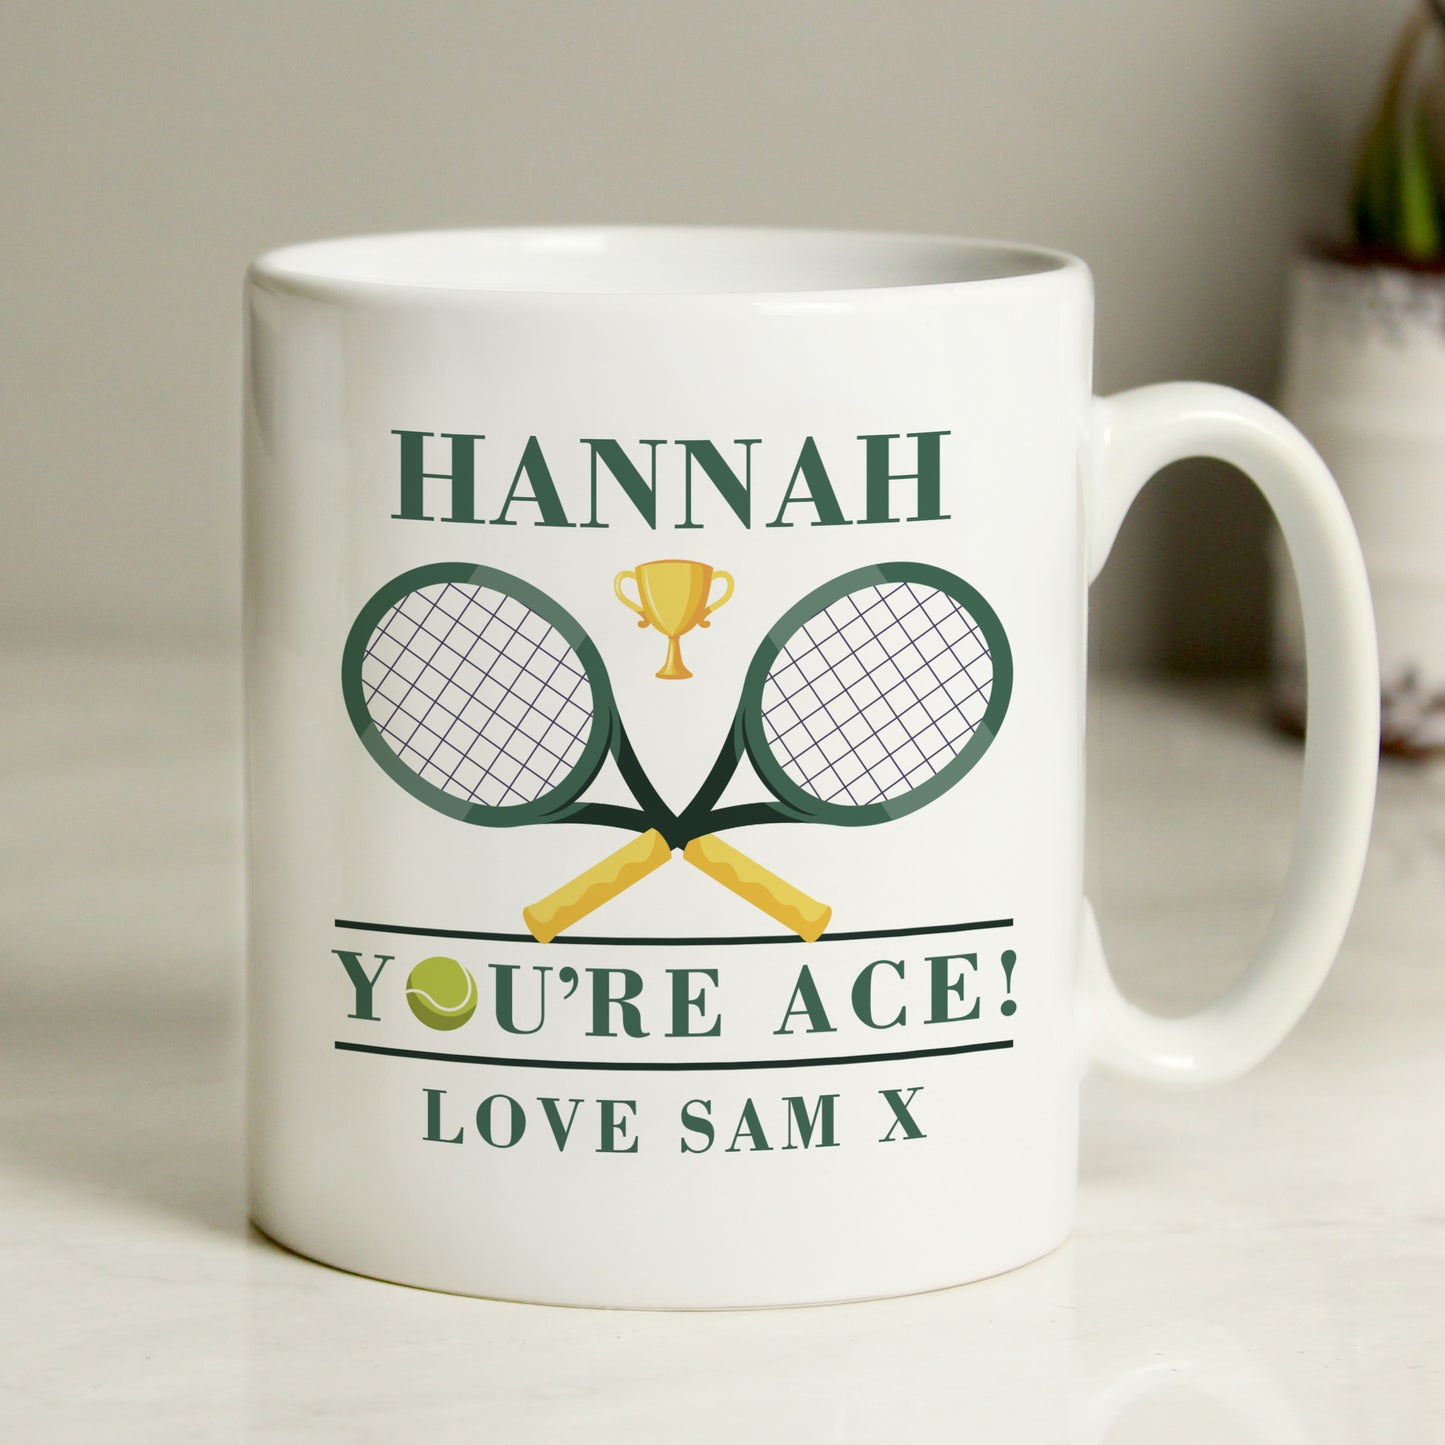 Personalised Tennis Father's Day Mug - Personalise It!